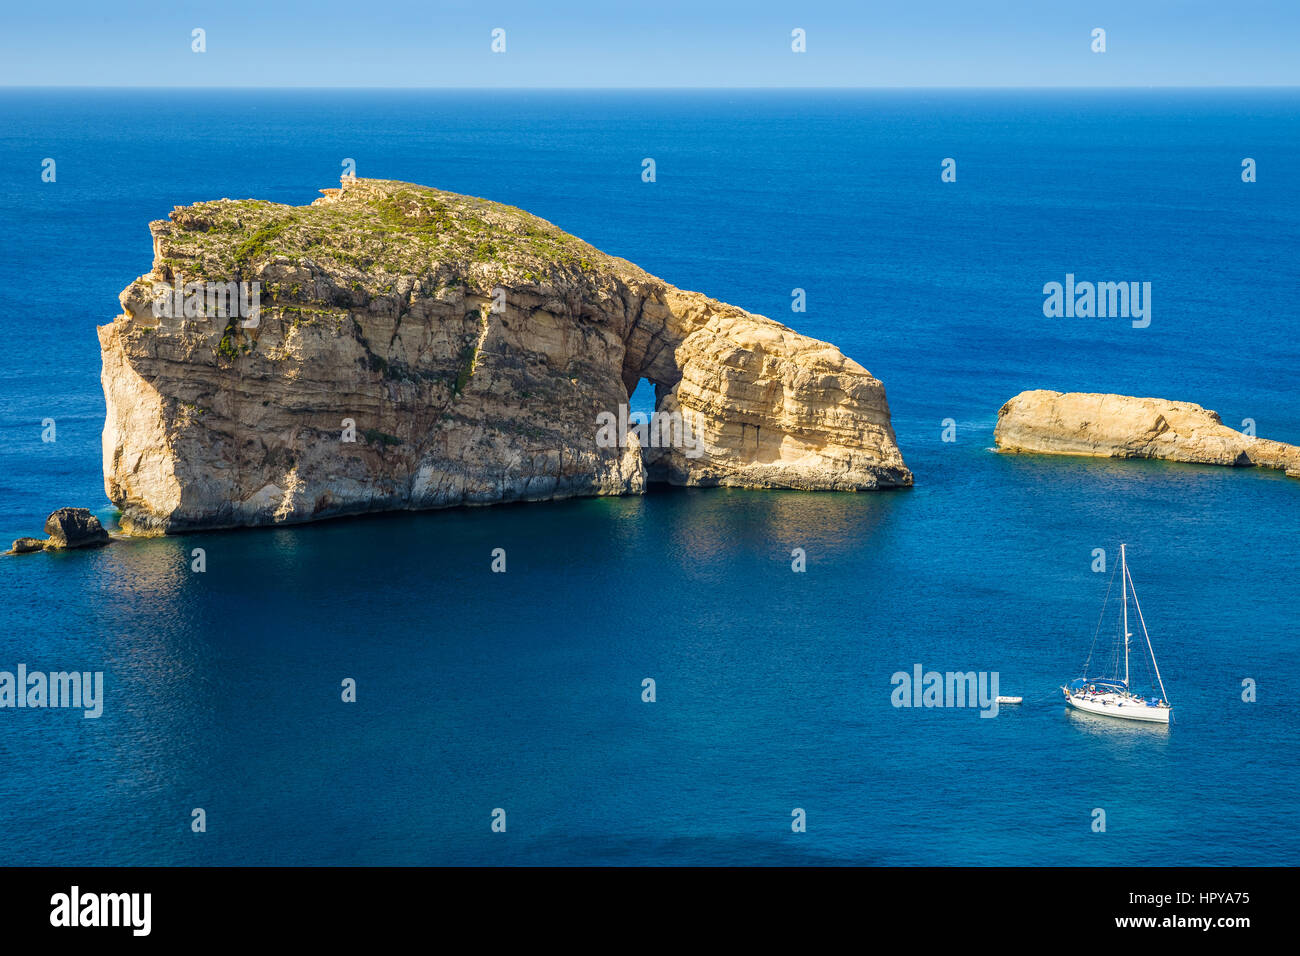 Gozo, Malta - The amazing Fungus Rock at Dwejra bay with sailboat, blue sea water and sky on a beautiful summer day Stock Photo